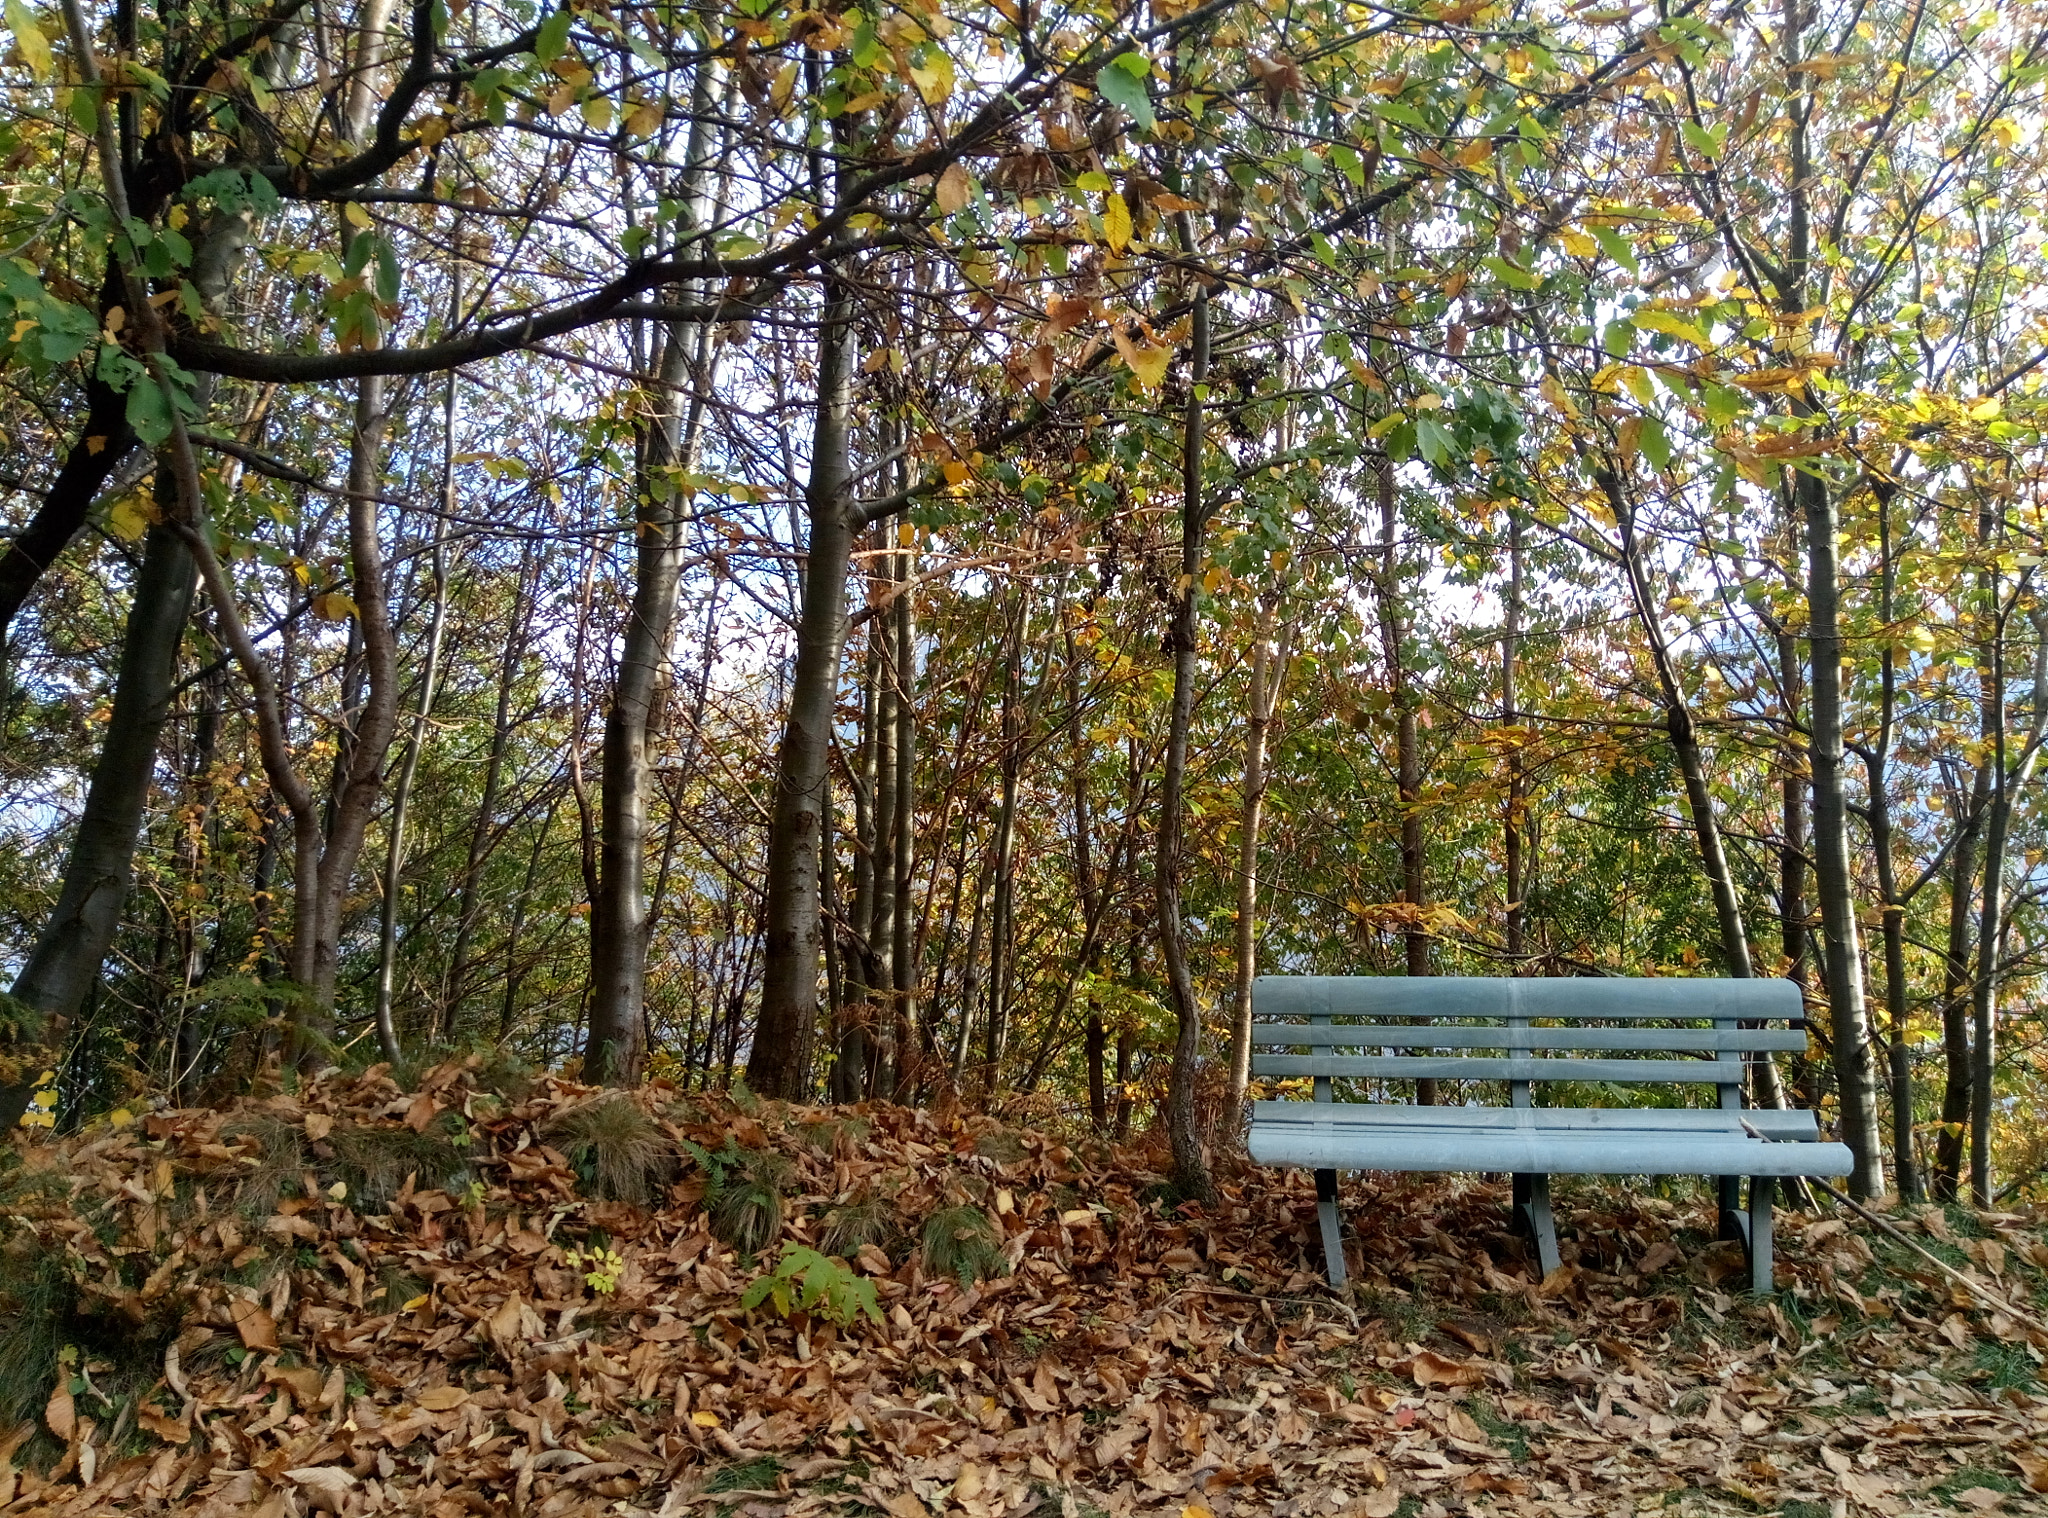 Meizu M3s sample photo. The bench of solitude photography